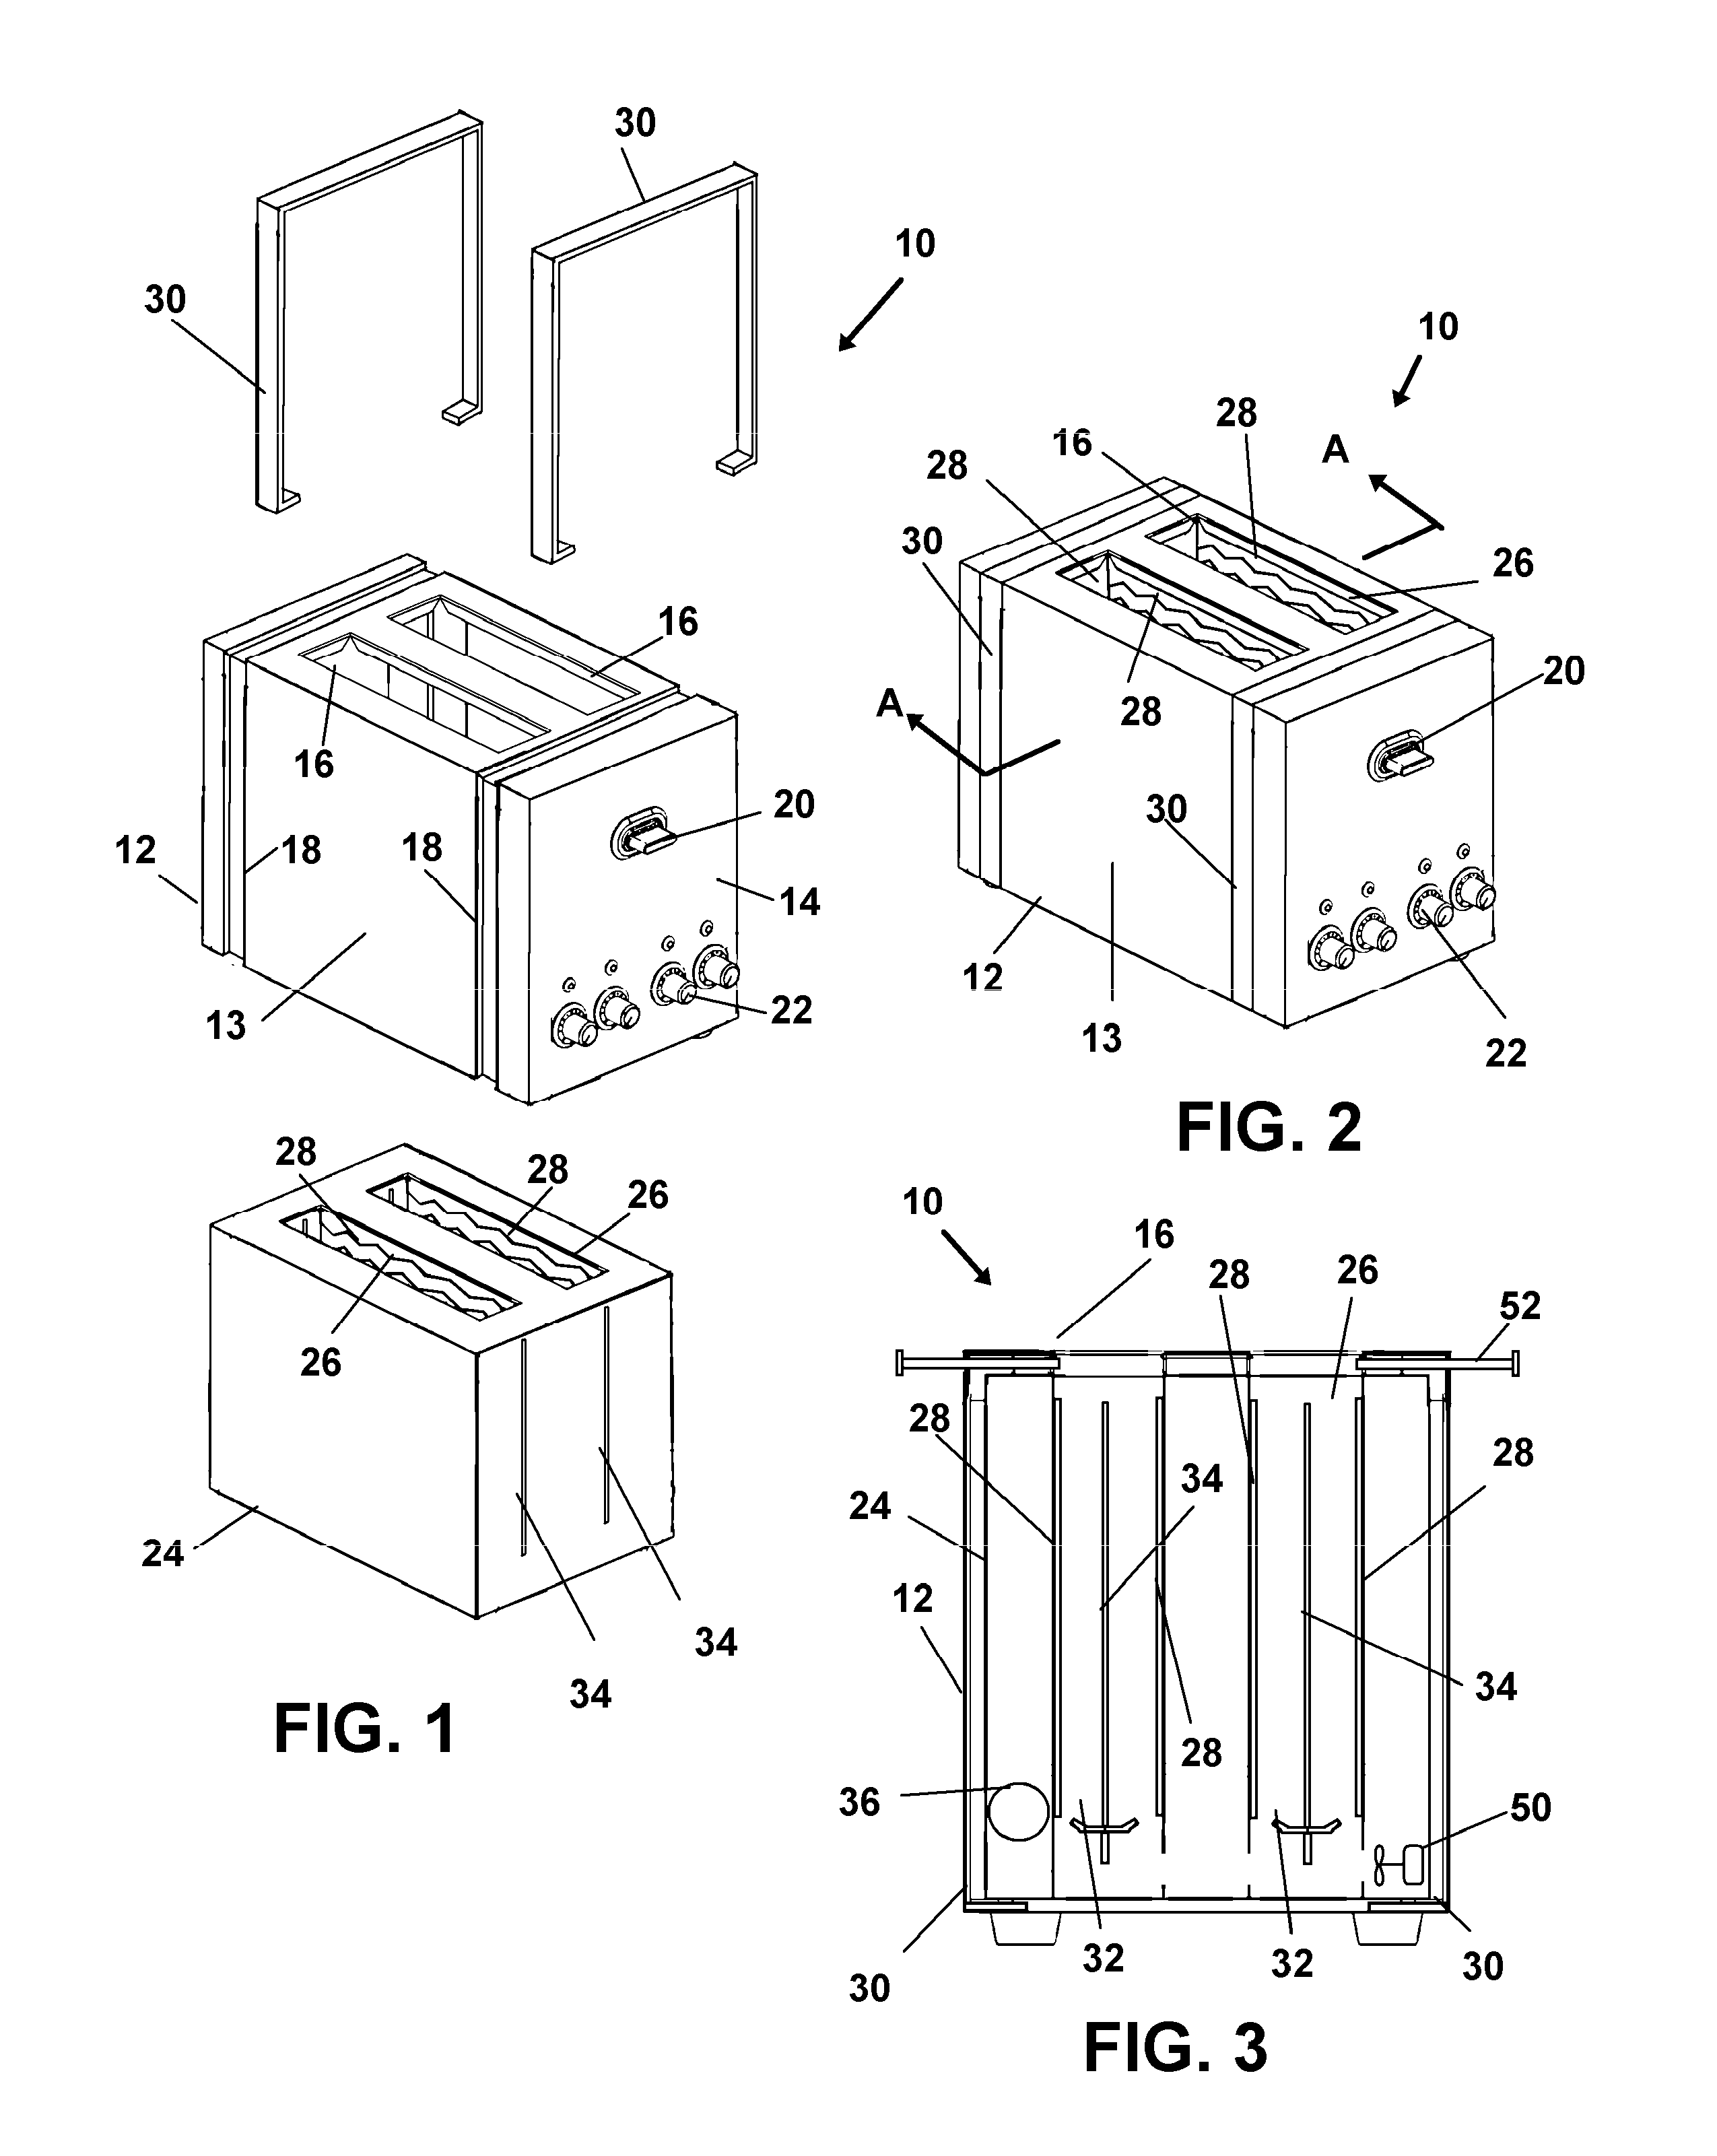 Toaster with independently controllable heating elements